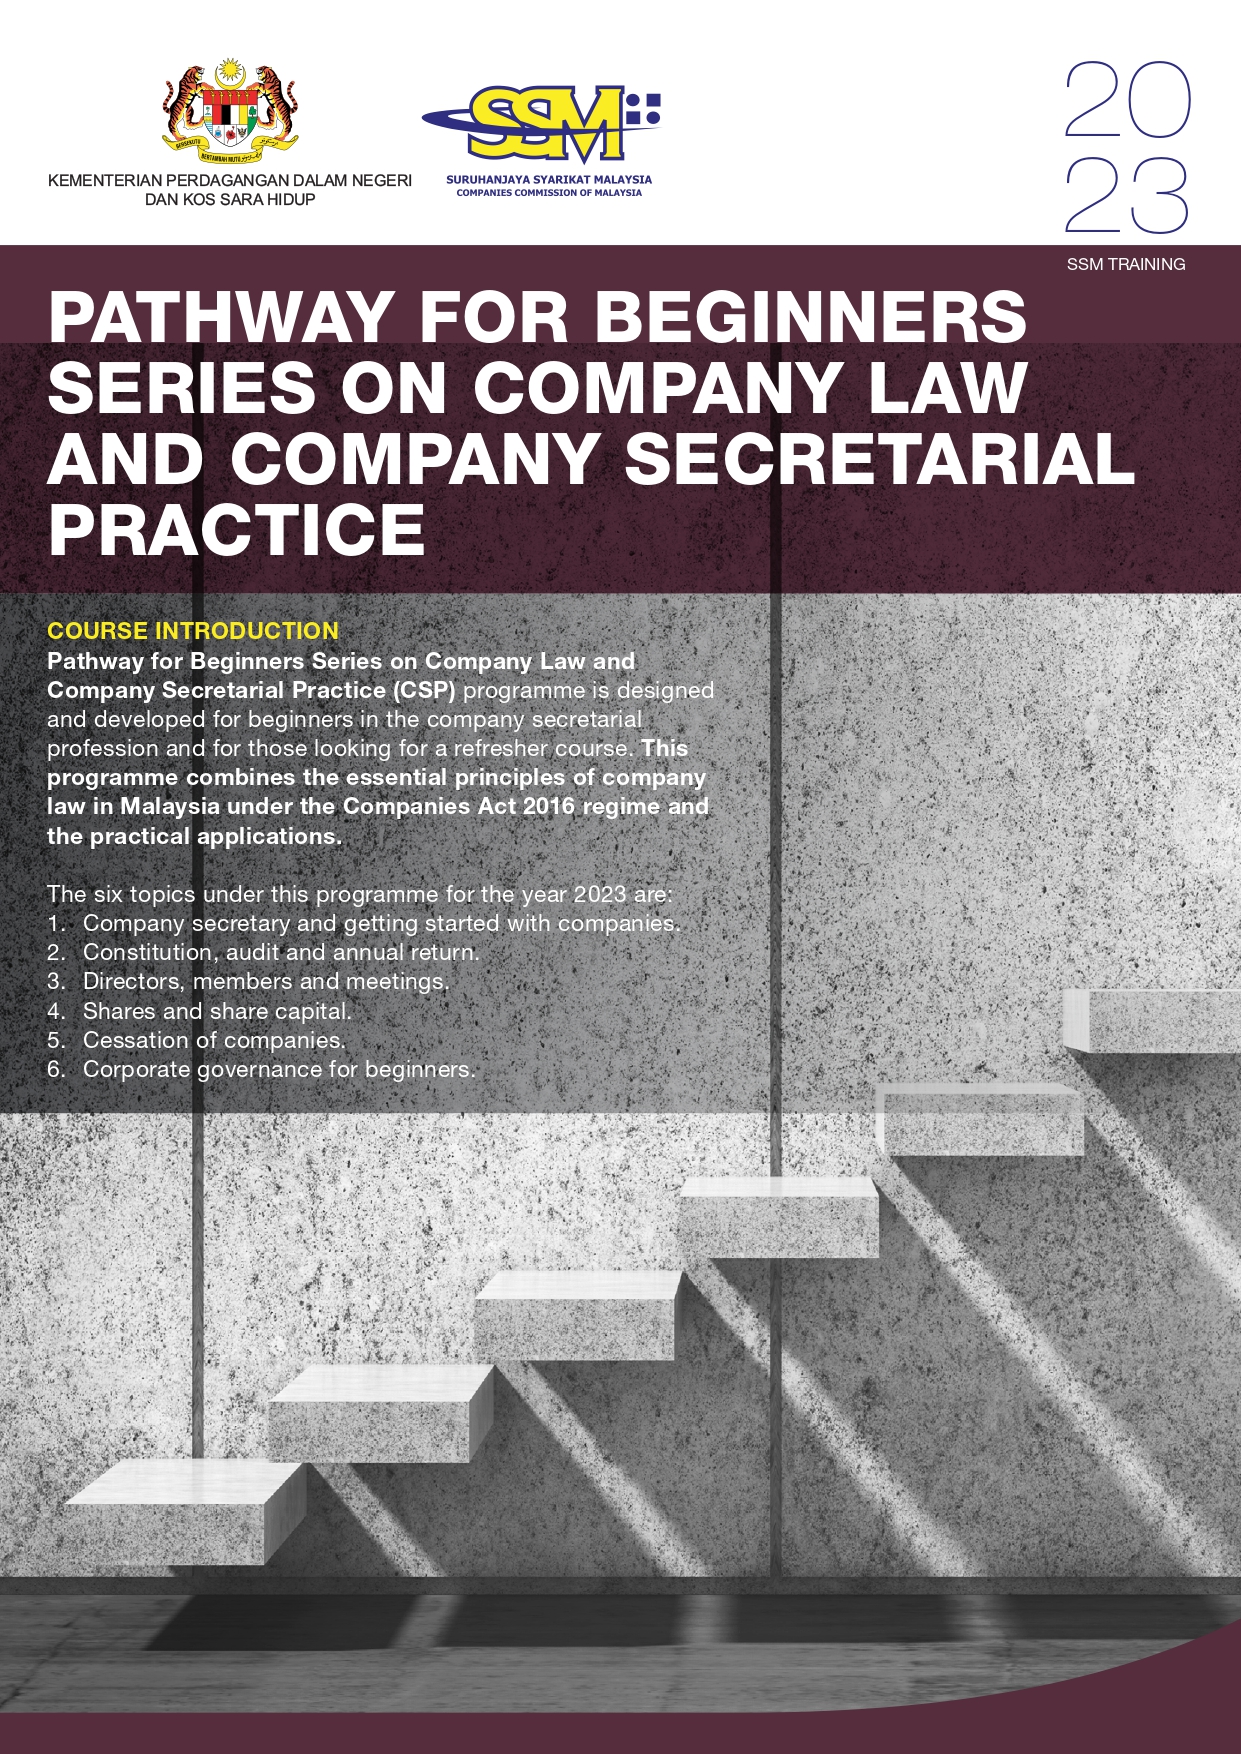 PATHWAY FOR BEGINNERS SERIES ON COMPANY LAW AND COMPANY SECRETARIAL PRACTICE_page-0001.jpg